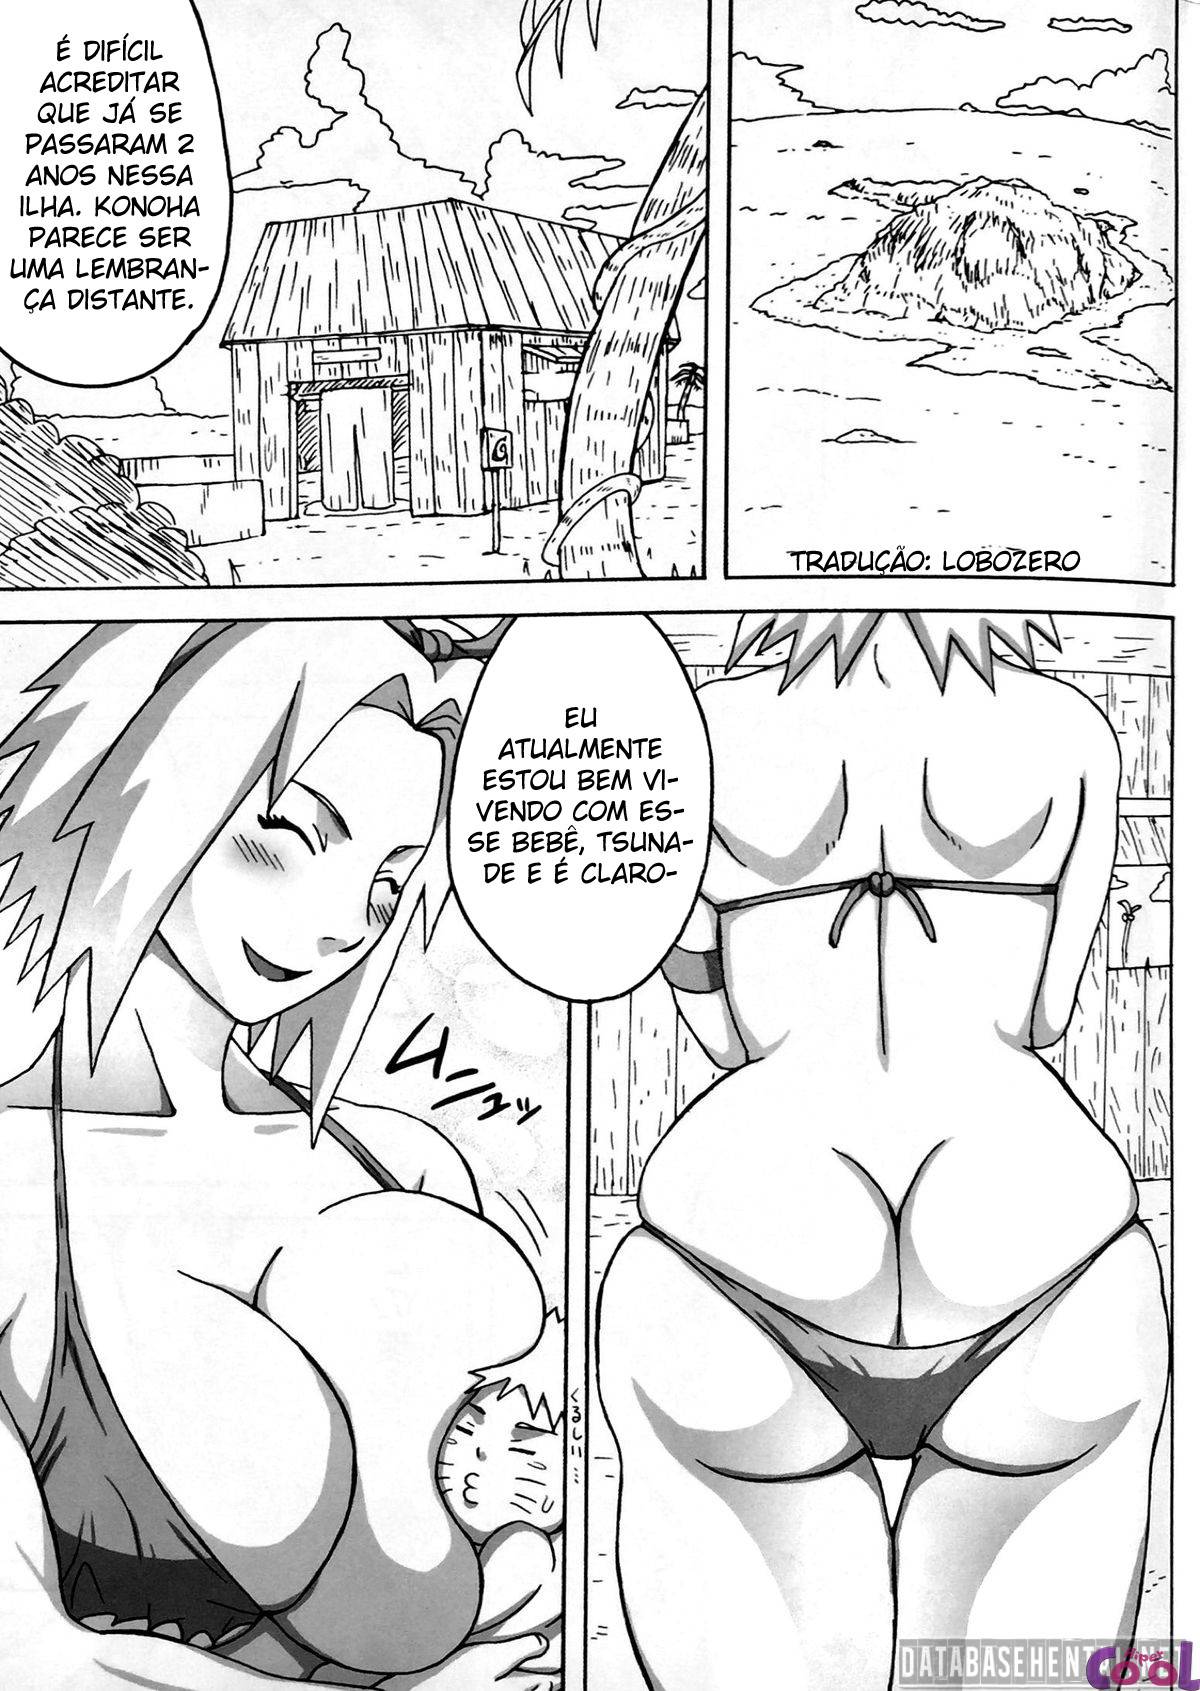 jungle-go-chapter-01-page-02.jpg